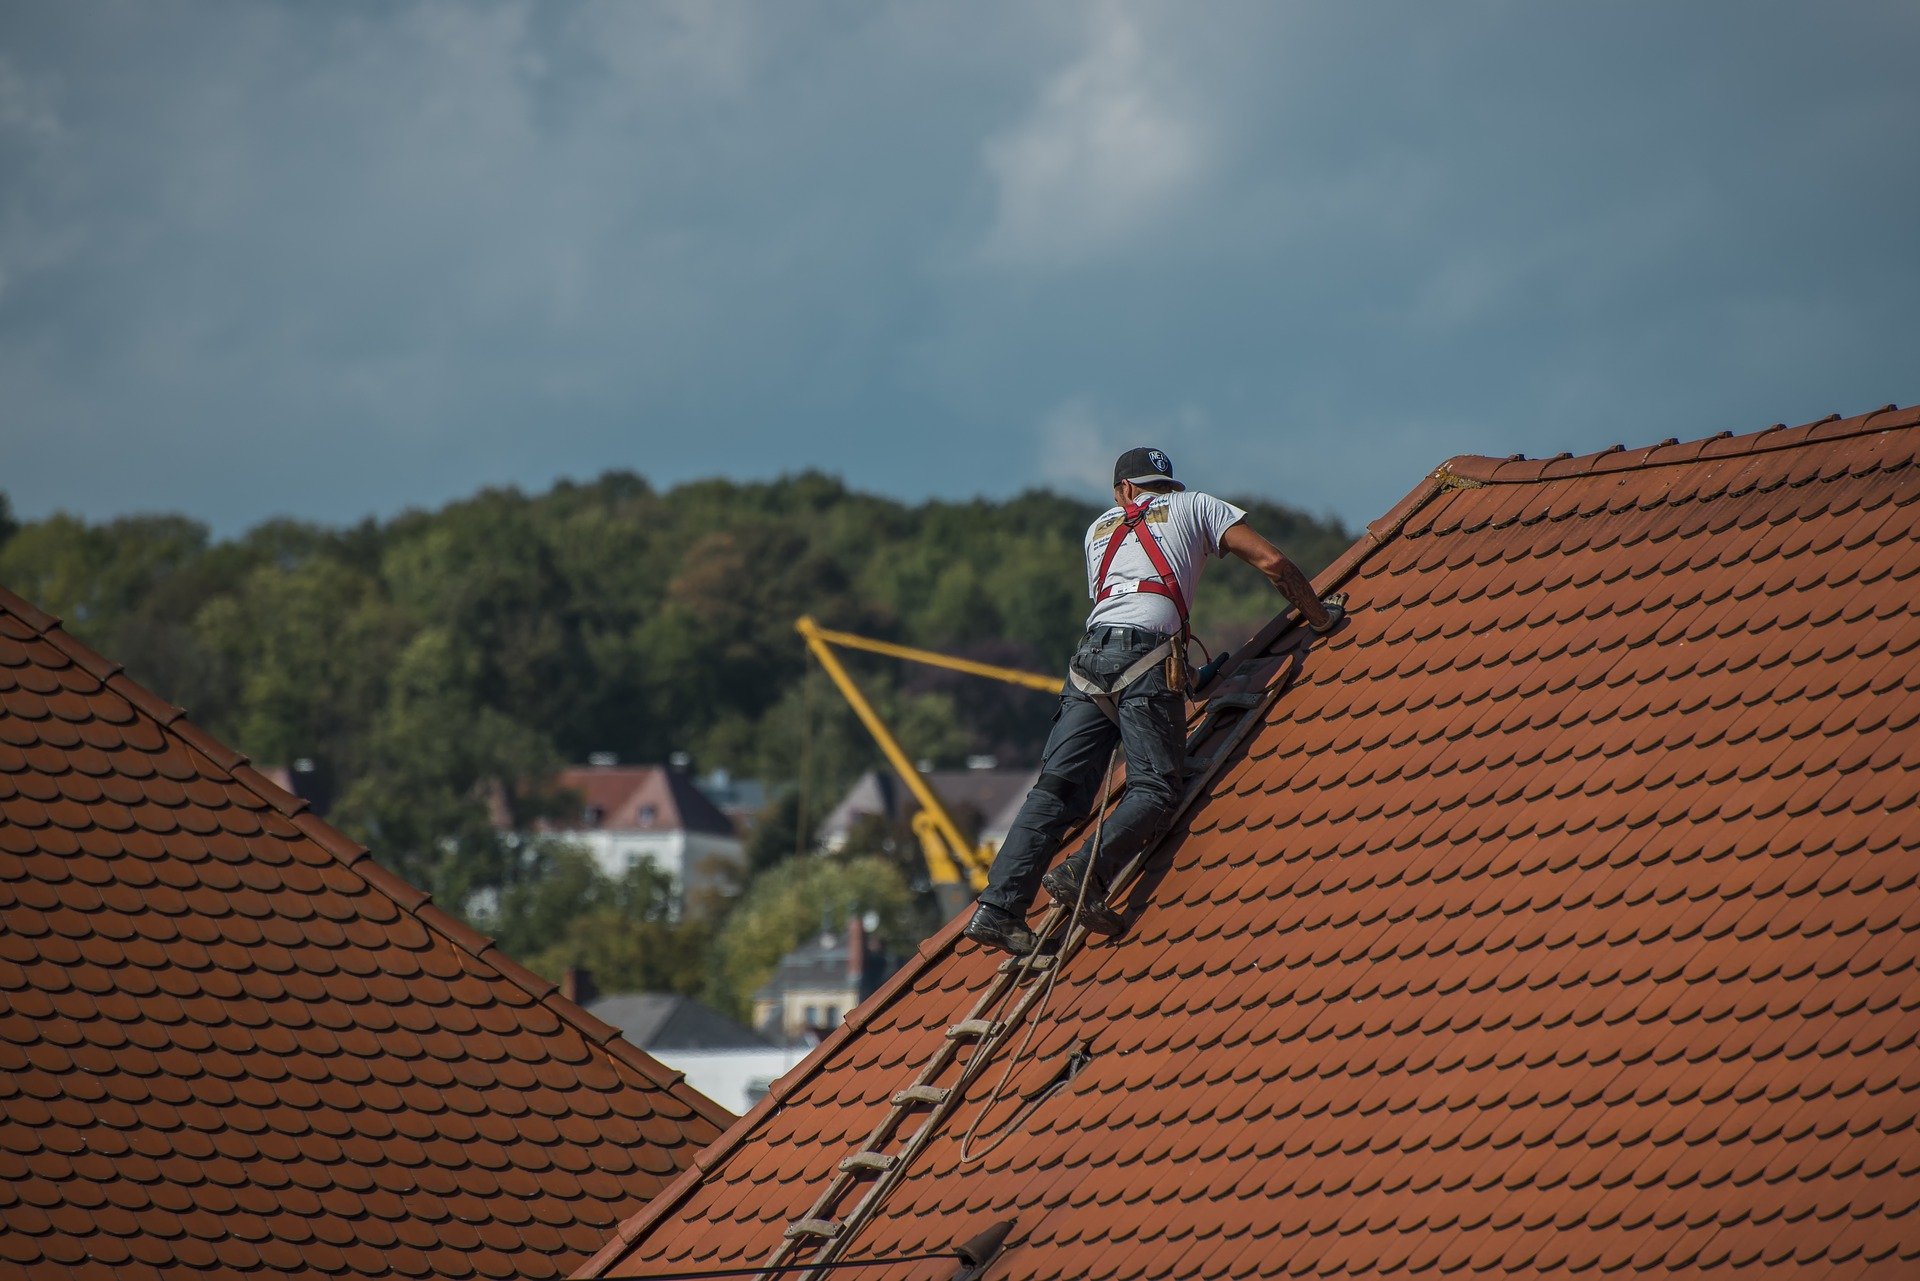 roofer using harness and safety equipment on red tile roof